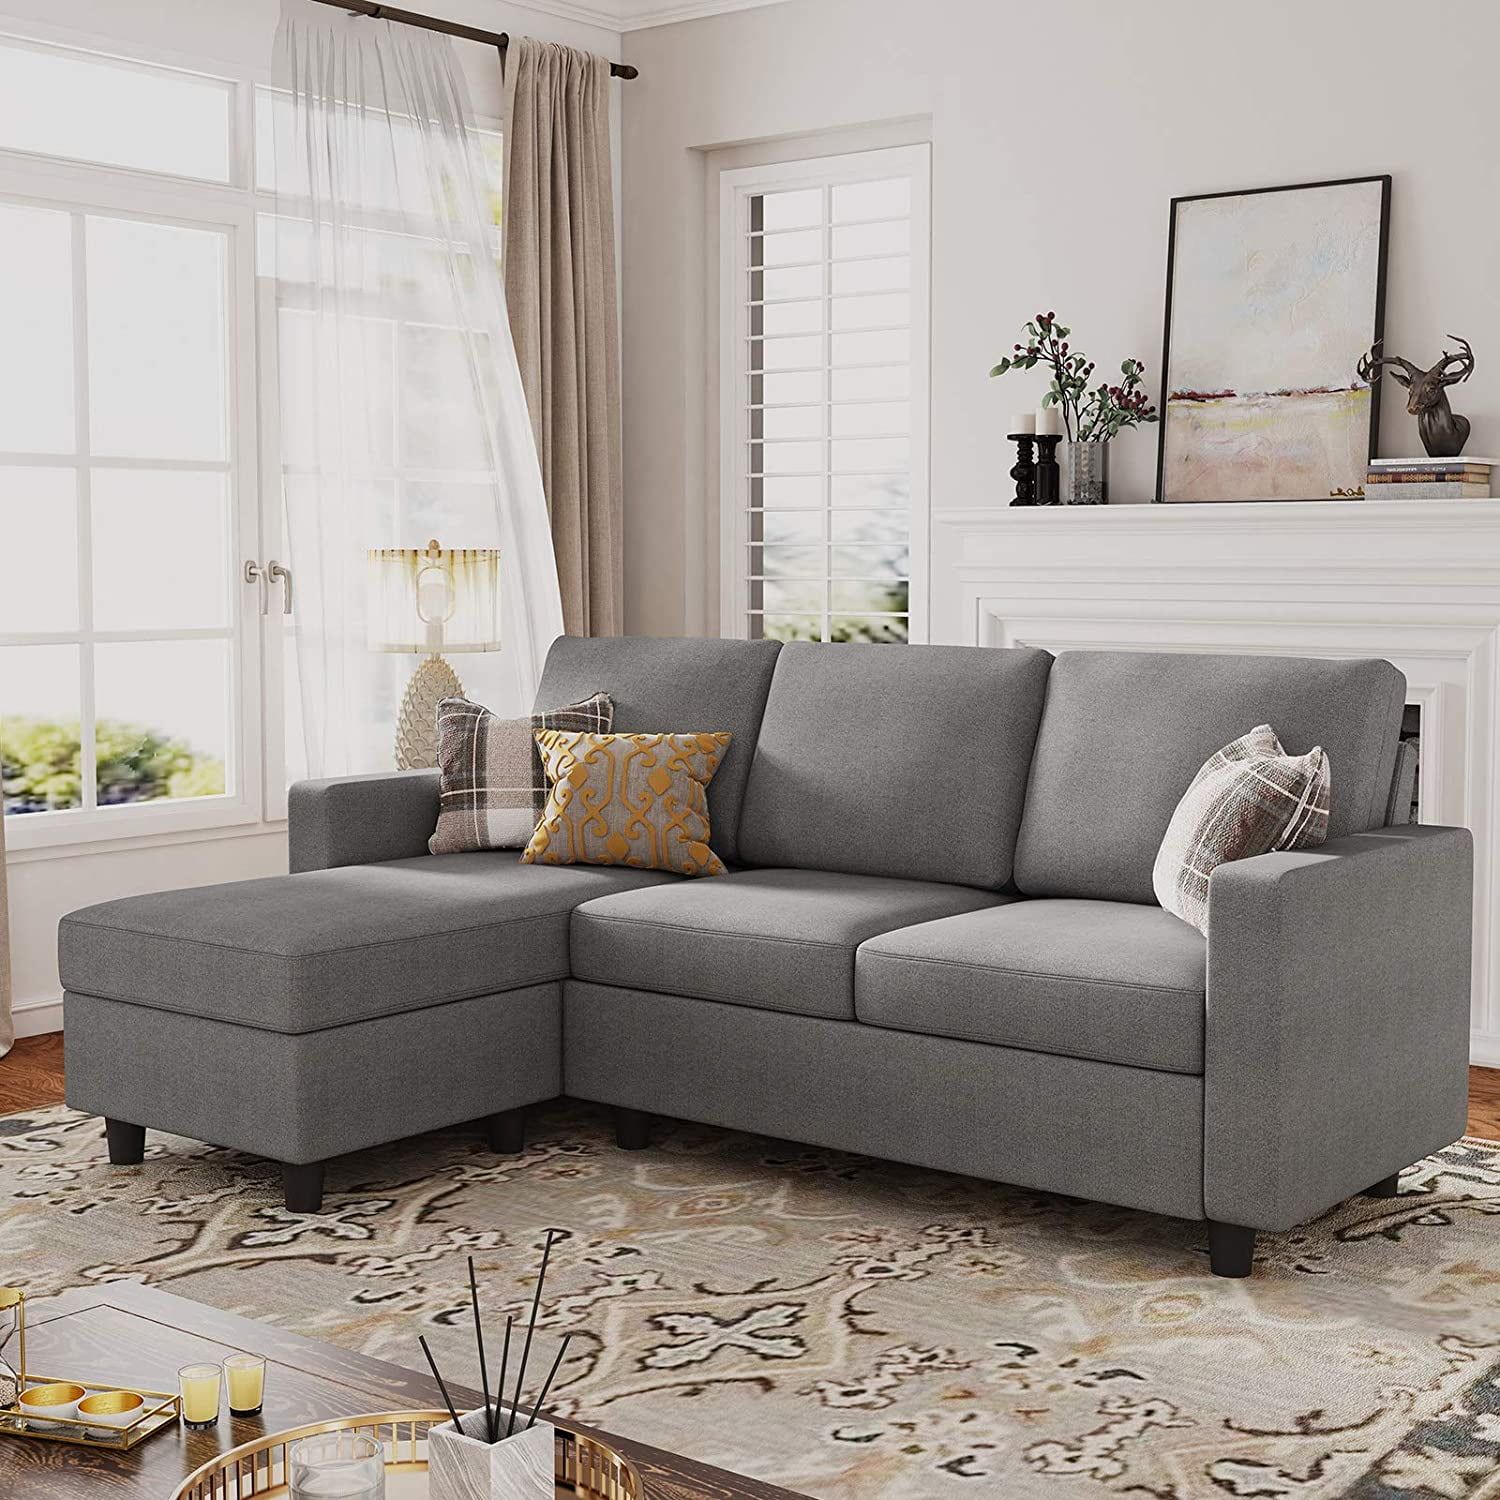 Honbay Dryades L Shaped Sectional Sofa, Gray Fabric – Walmart With Regard To Gray Linen Sofas (Photo 6 of 15)